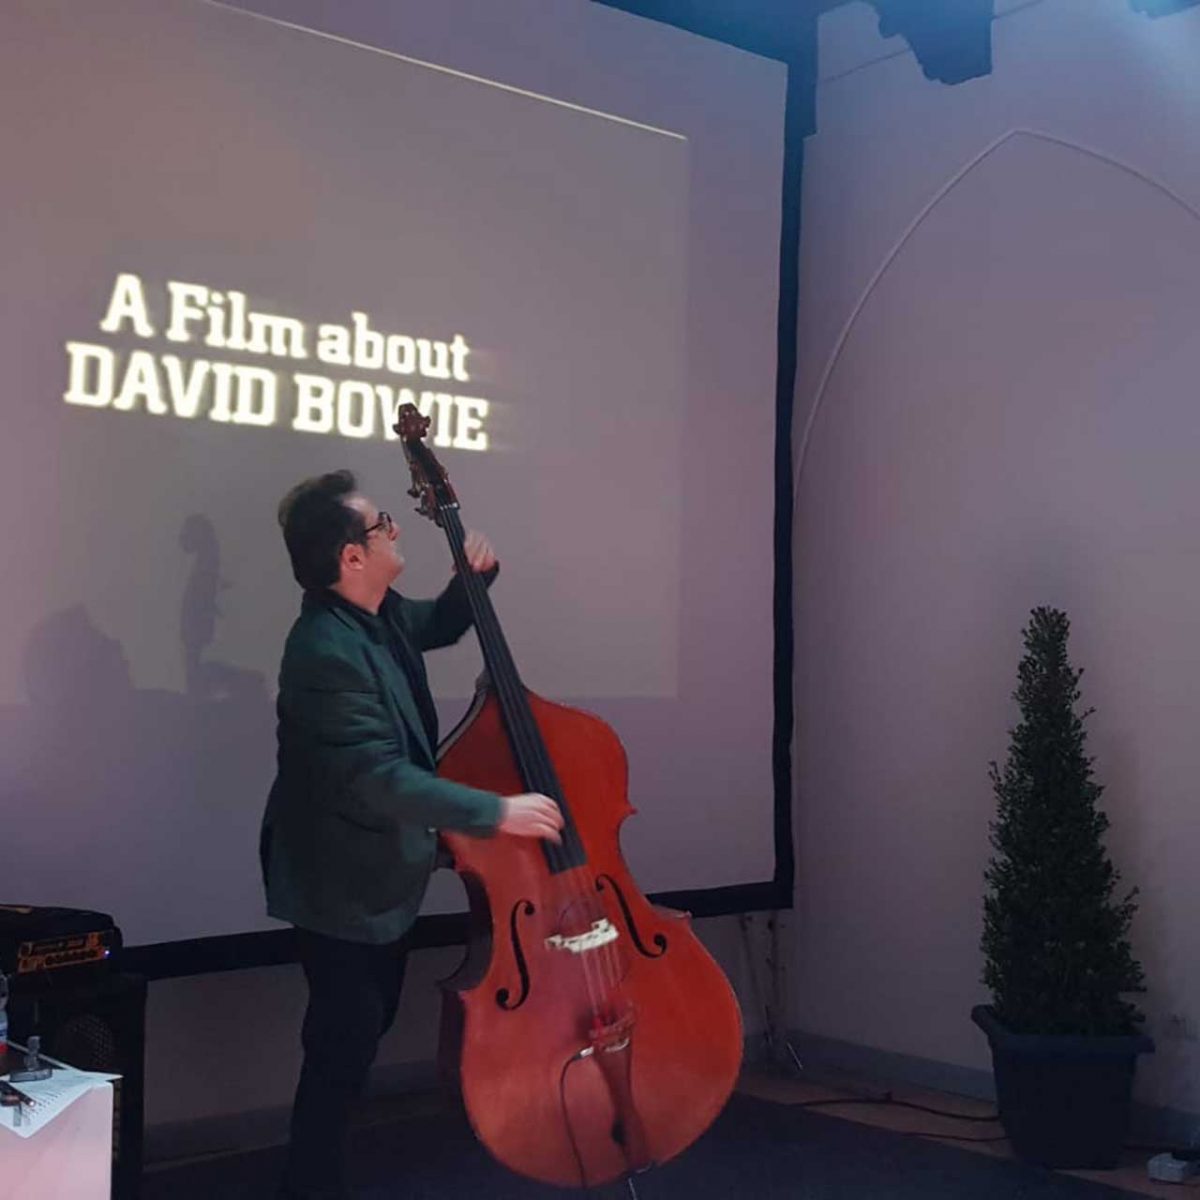 Bass Tribute to David Bowie - Pierpaolo Martino